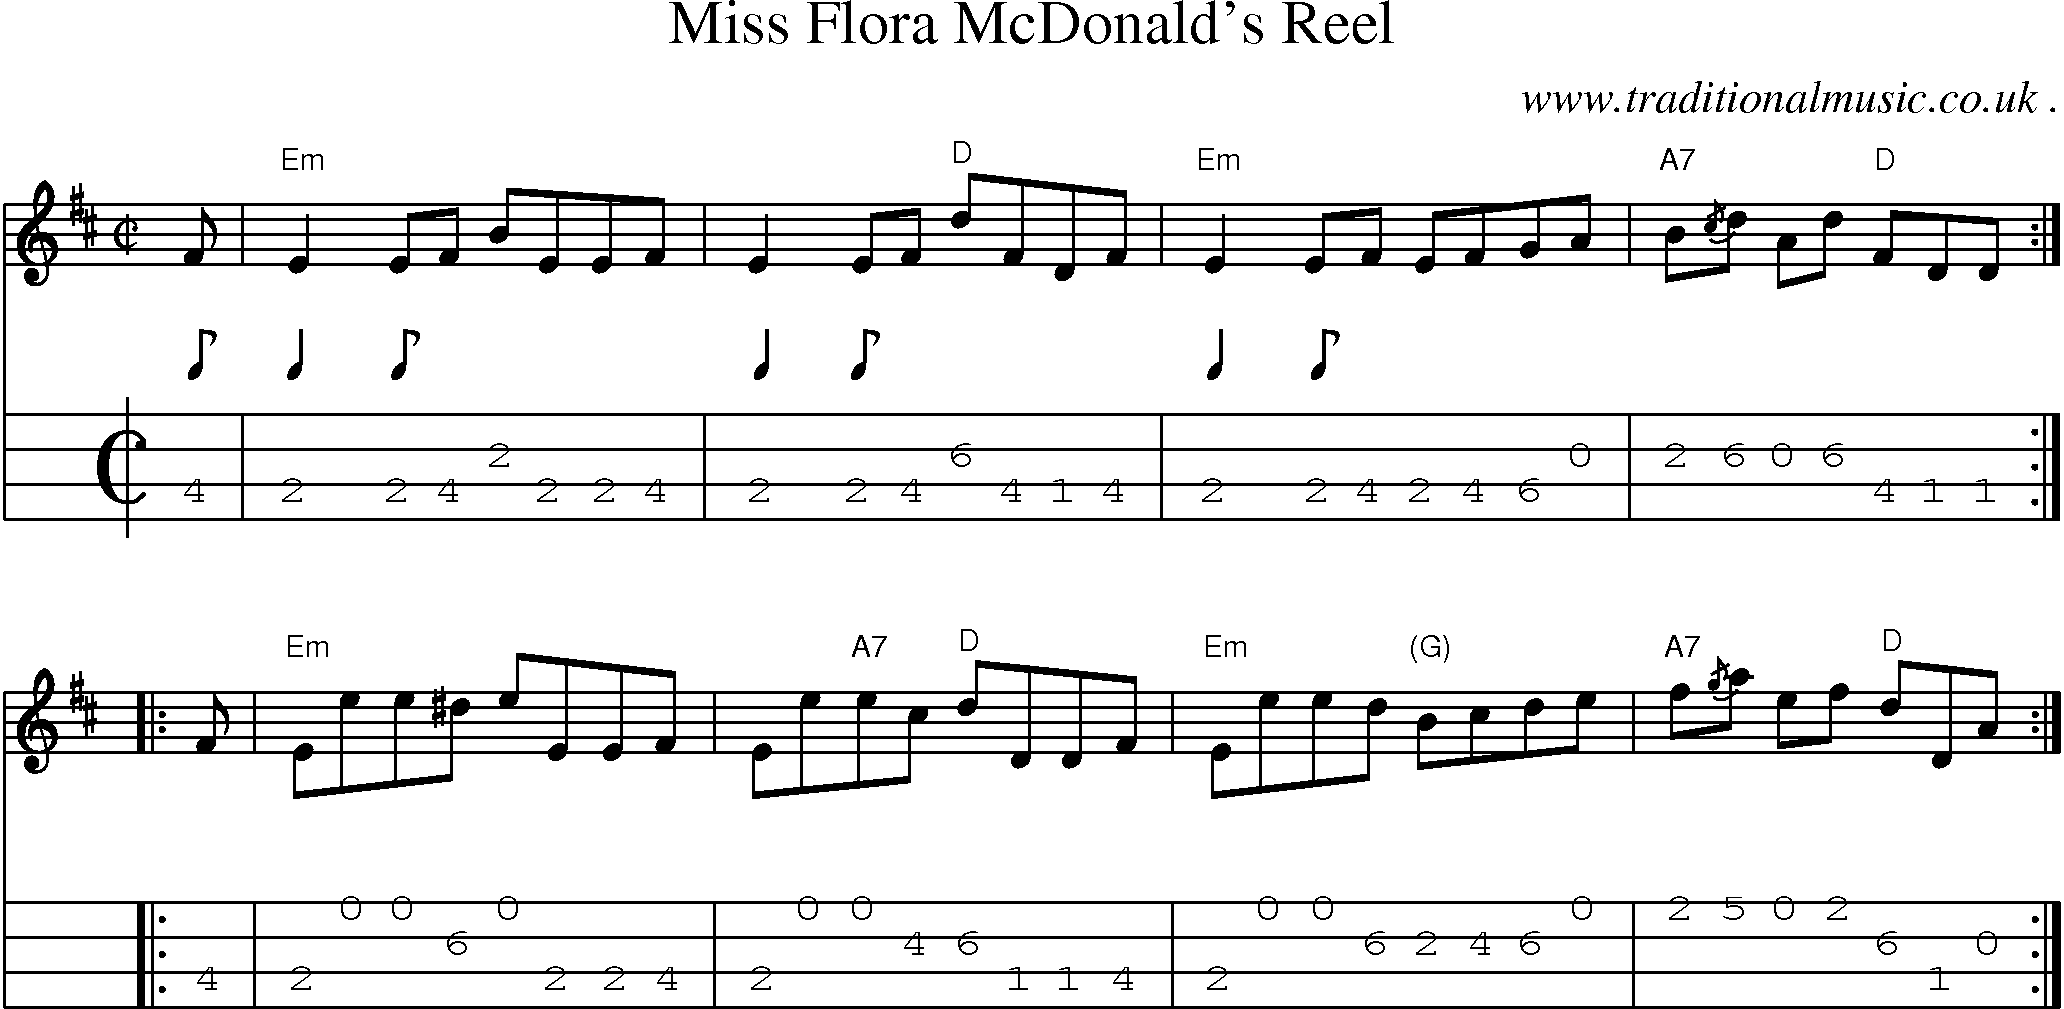 Sheet-music  score, Chords and Mandolin Tabs for Miss Flora Mcdonalds Reel